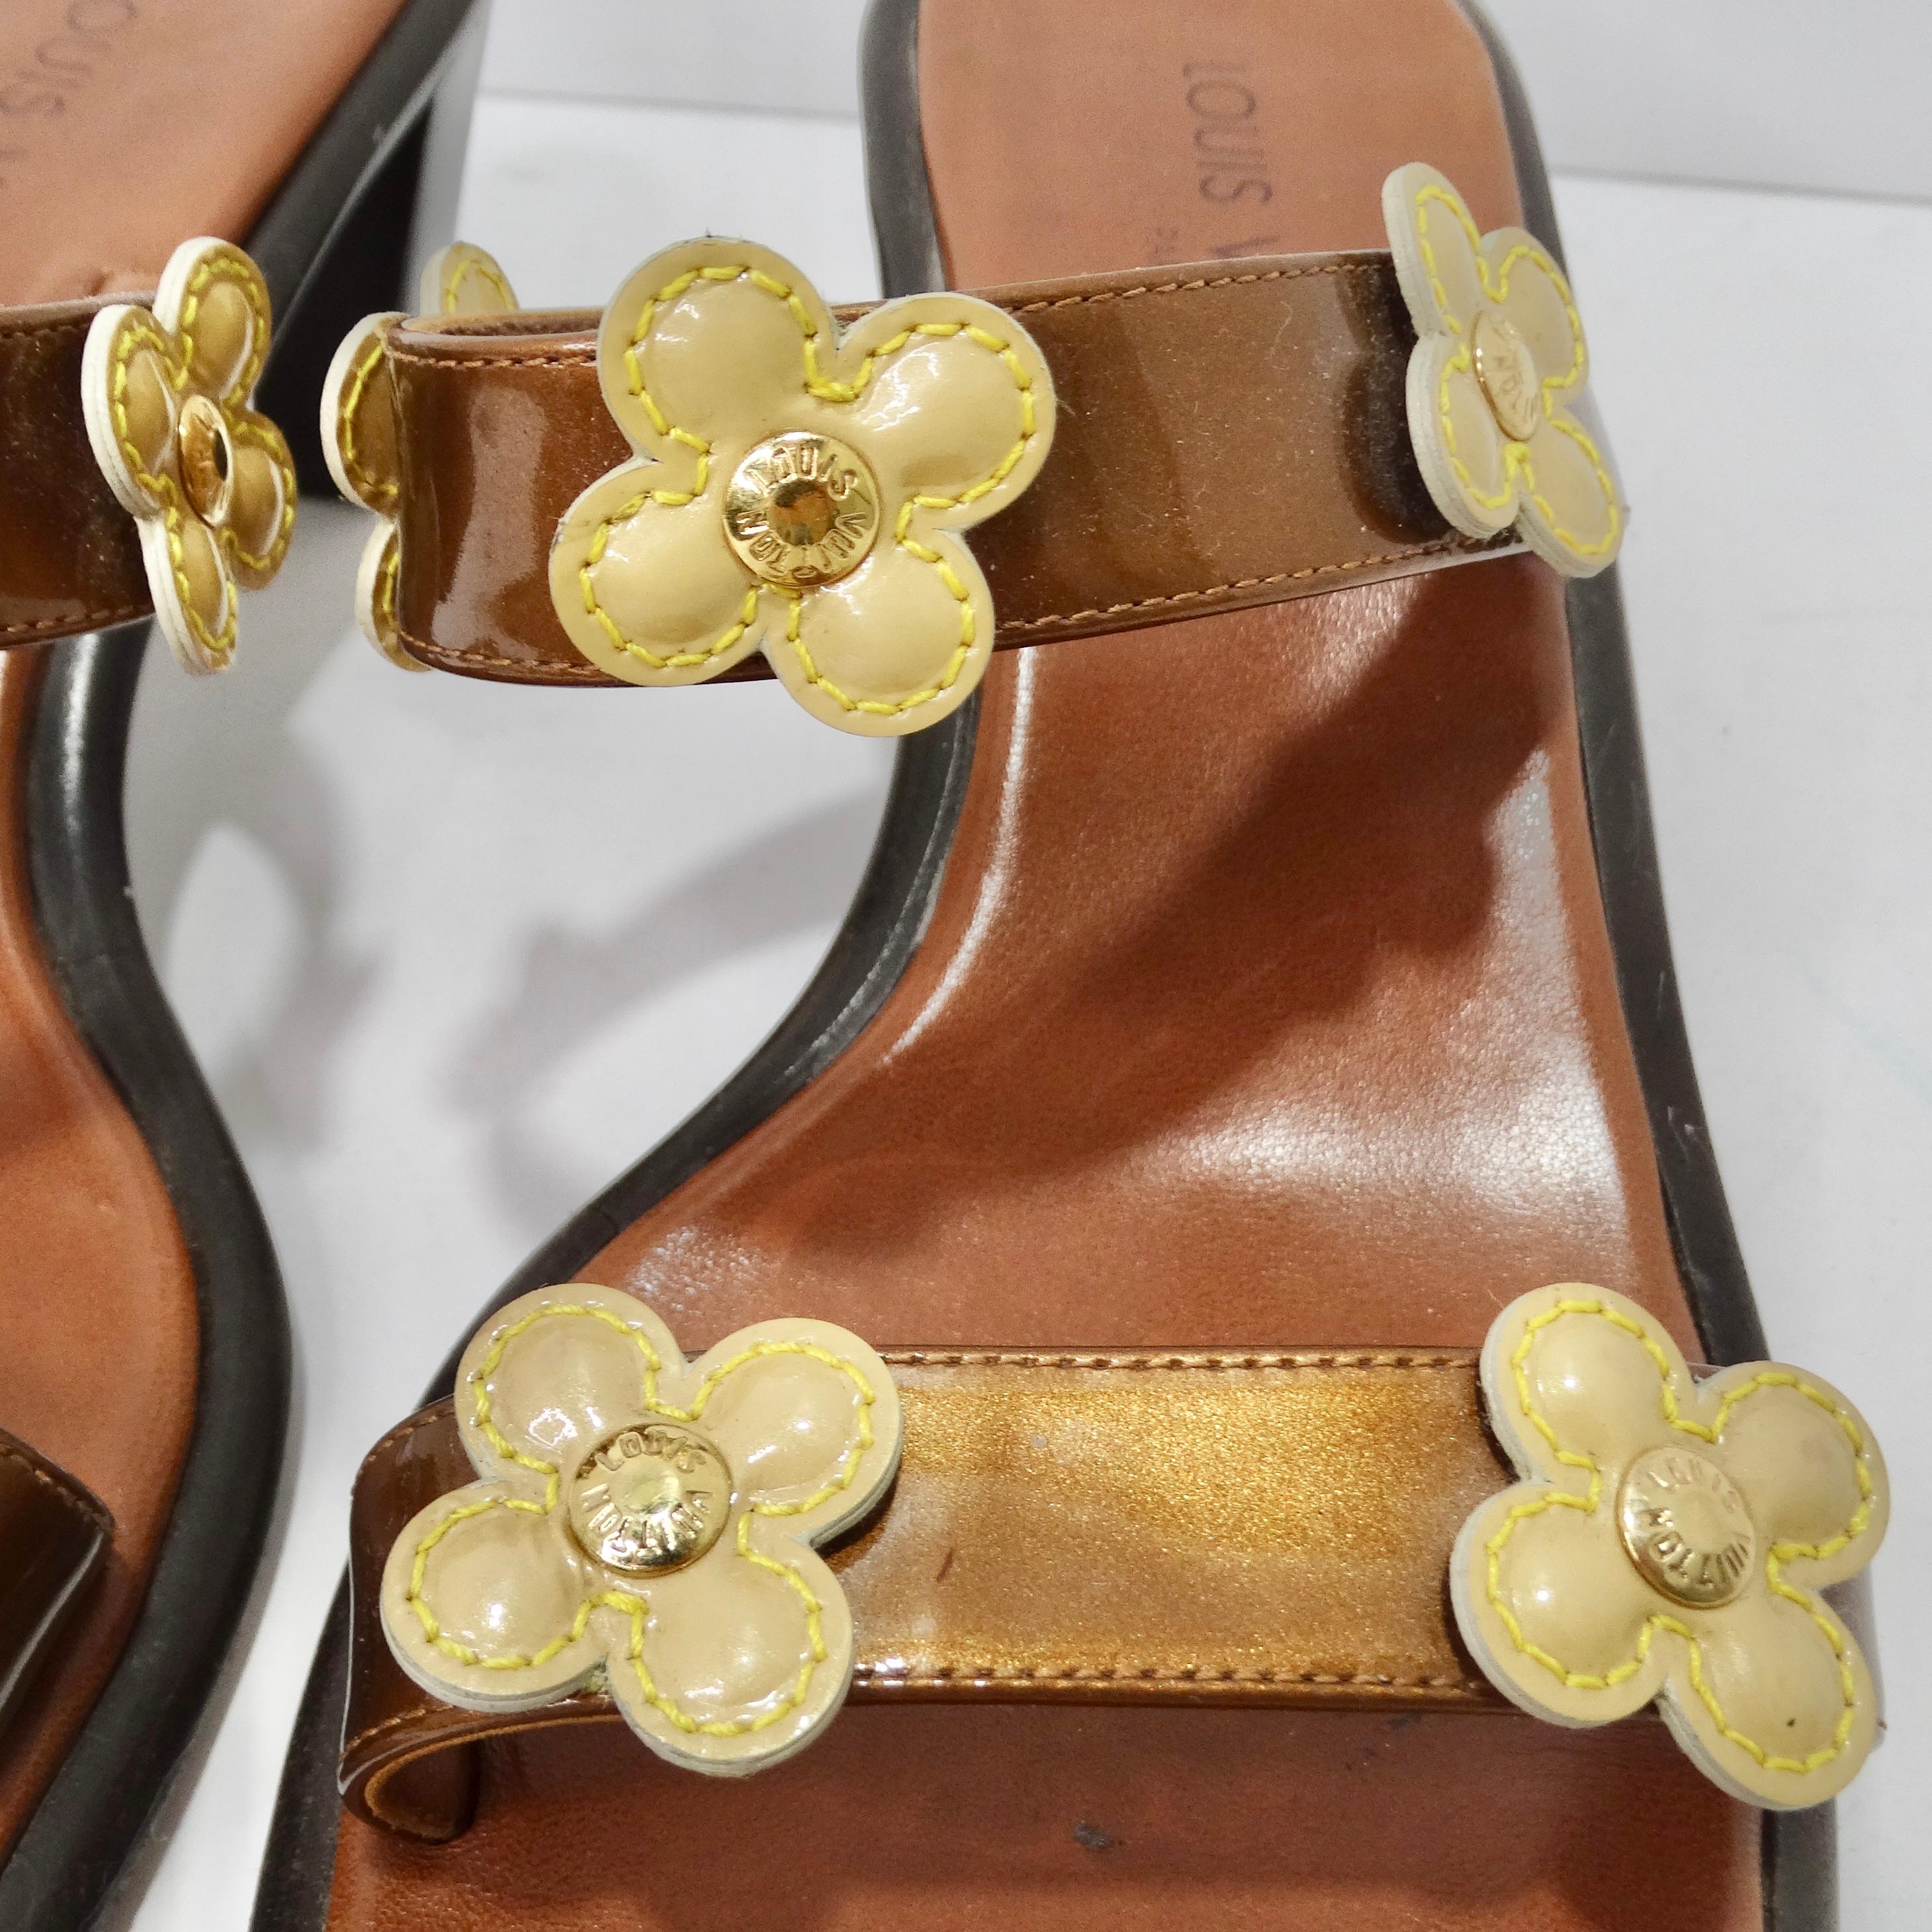 Louis Vuitton Patent Leather Flower Heels In Good Condition For Sale In Scottsdale, AZ